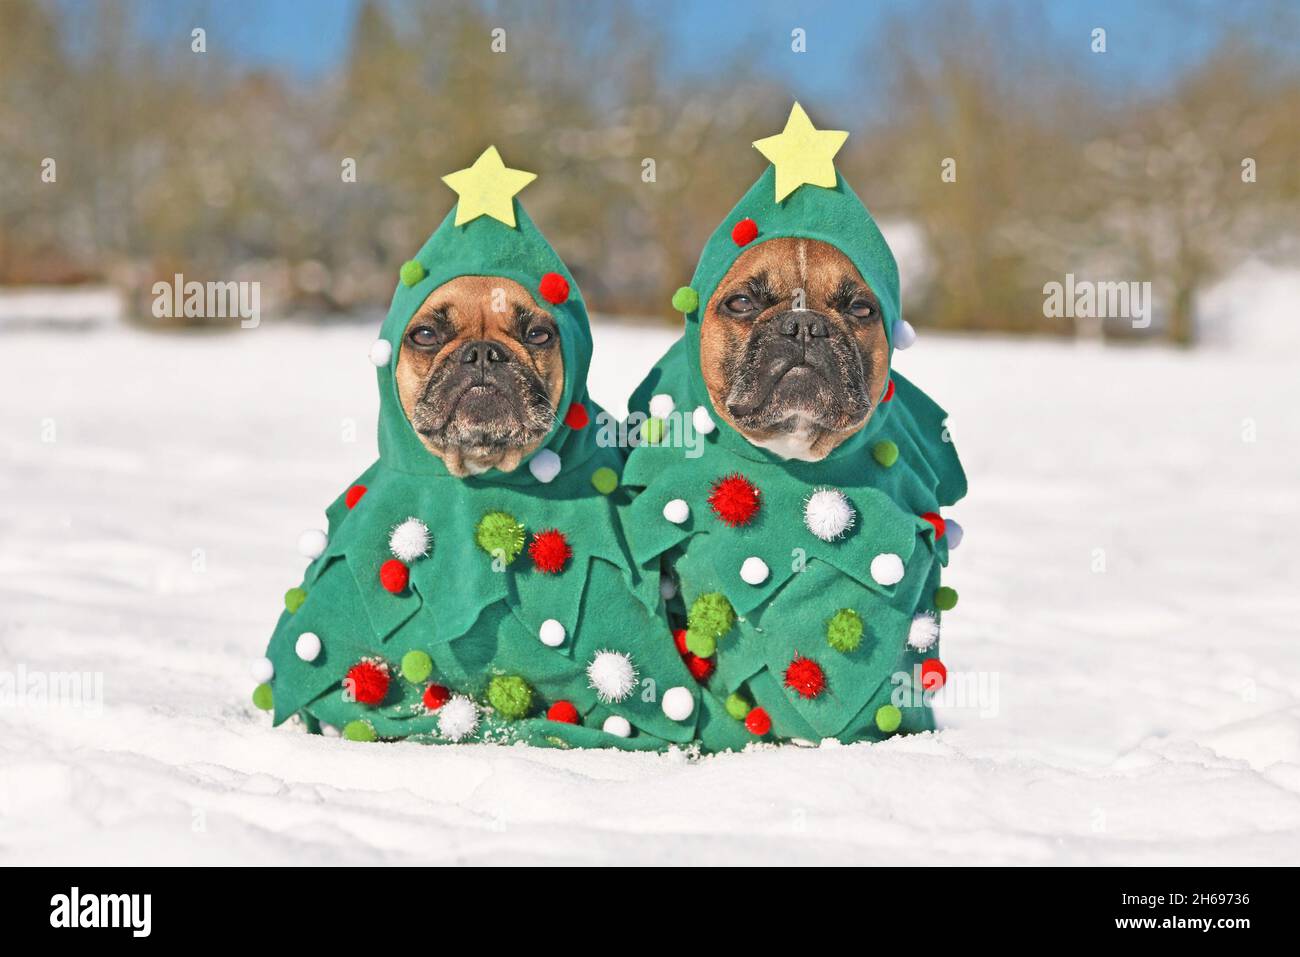 Pair of French Bulldog dogs wearing Christmas tree costumes with baubles and stars sitting together in snow Stock Photo